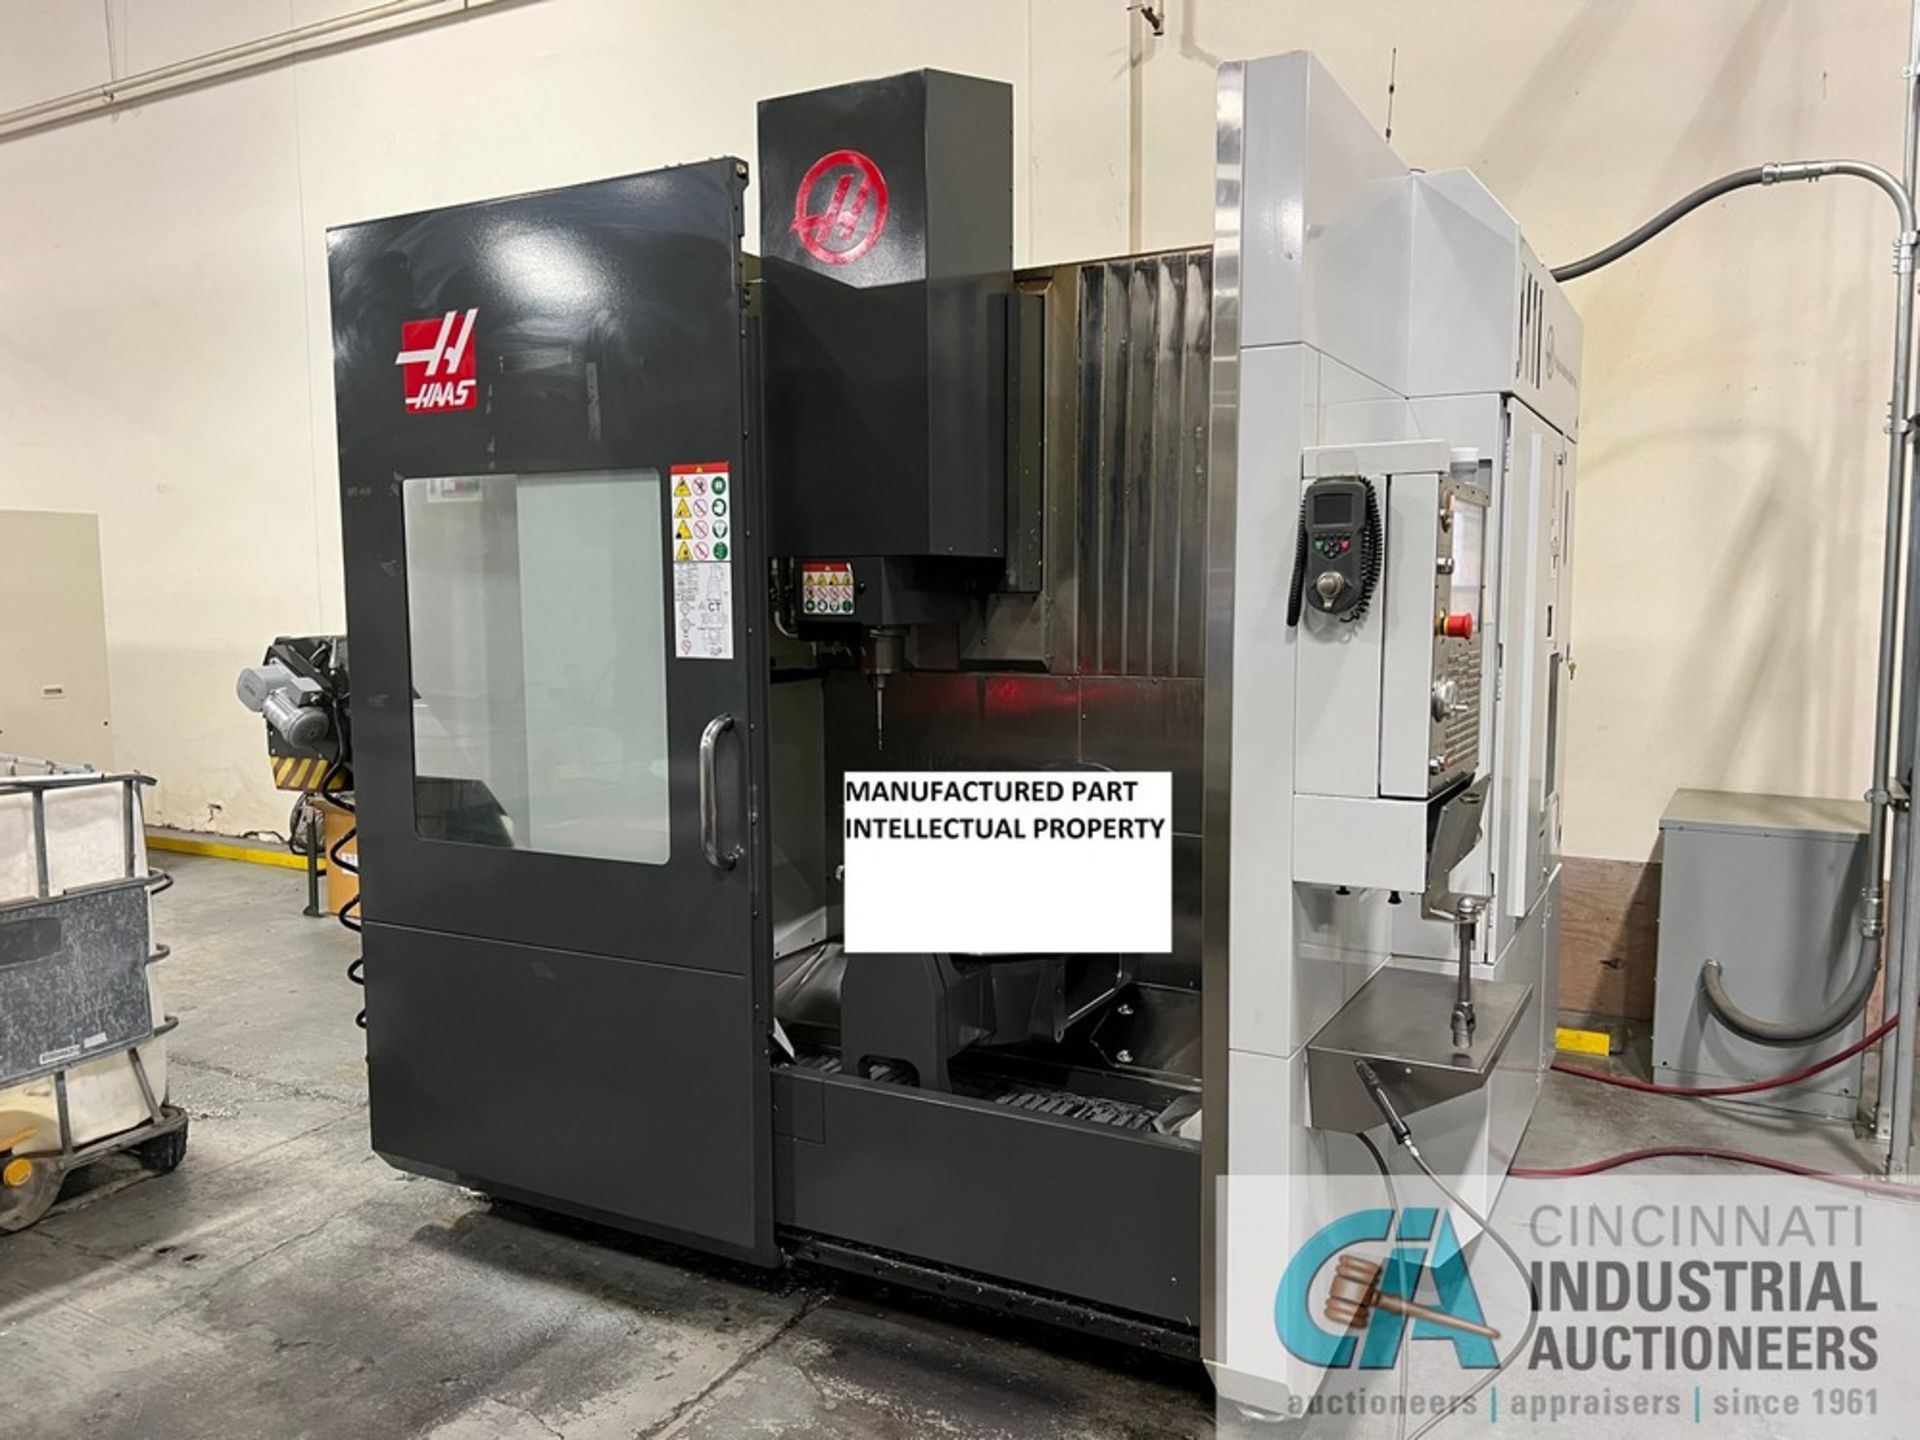 Haas Model UMC-750 Five-Axis CNC Universal Machining Center (2017) 6,578 Cutting Hours Showing